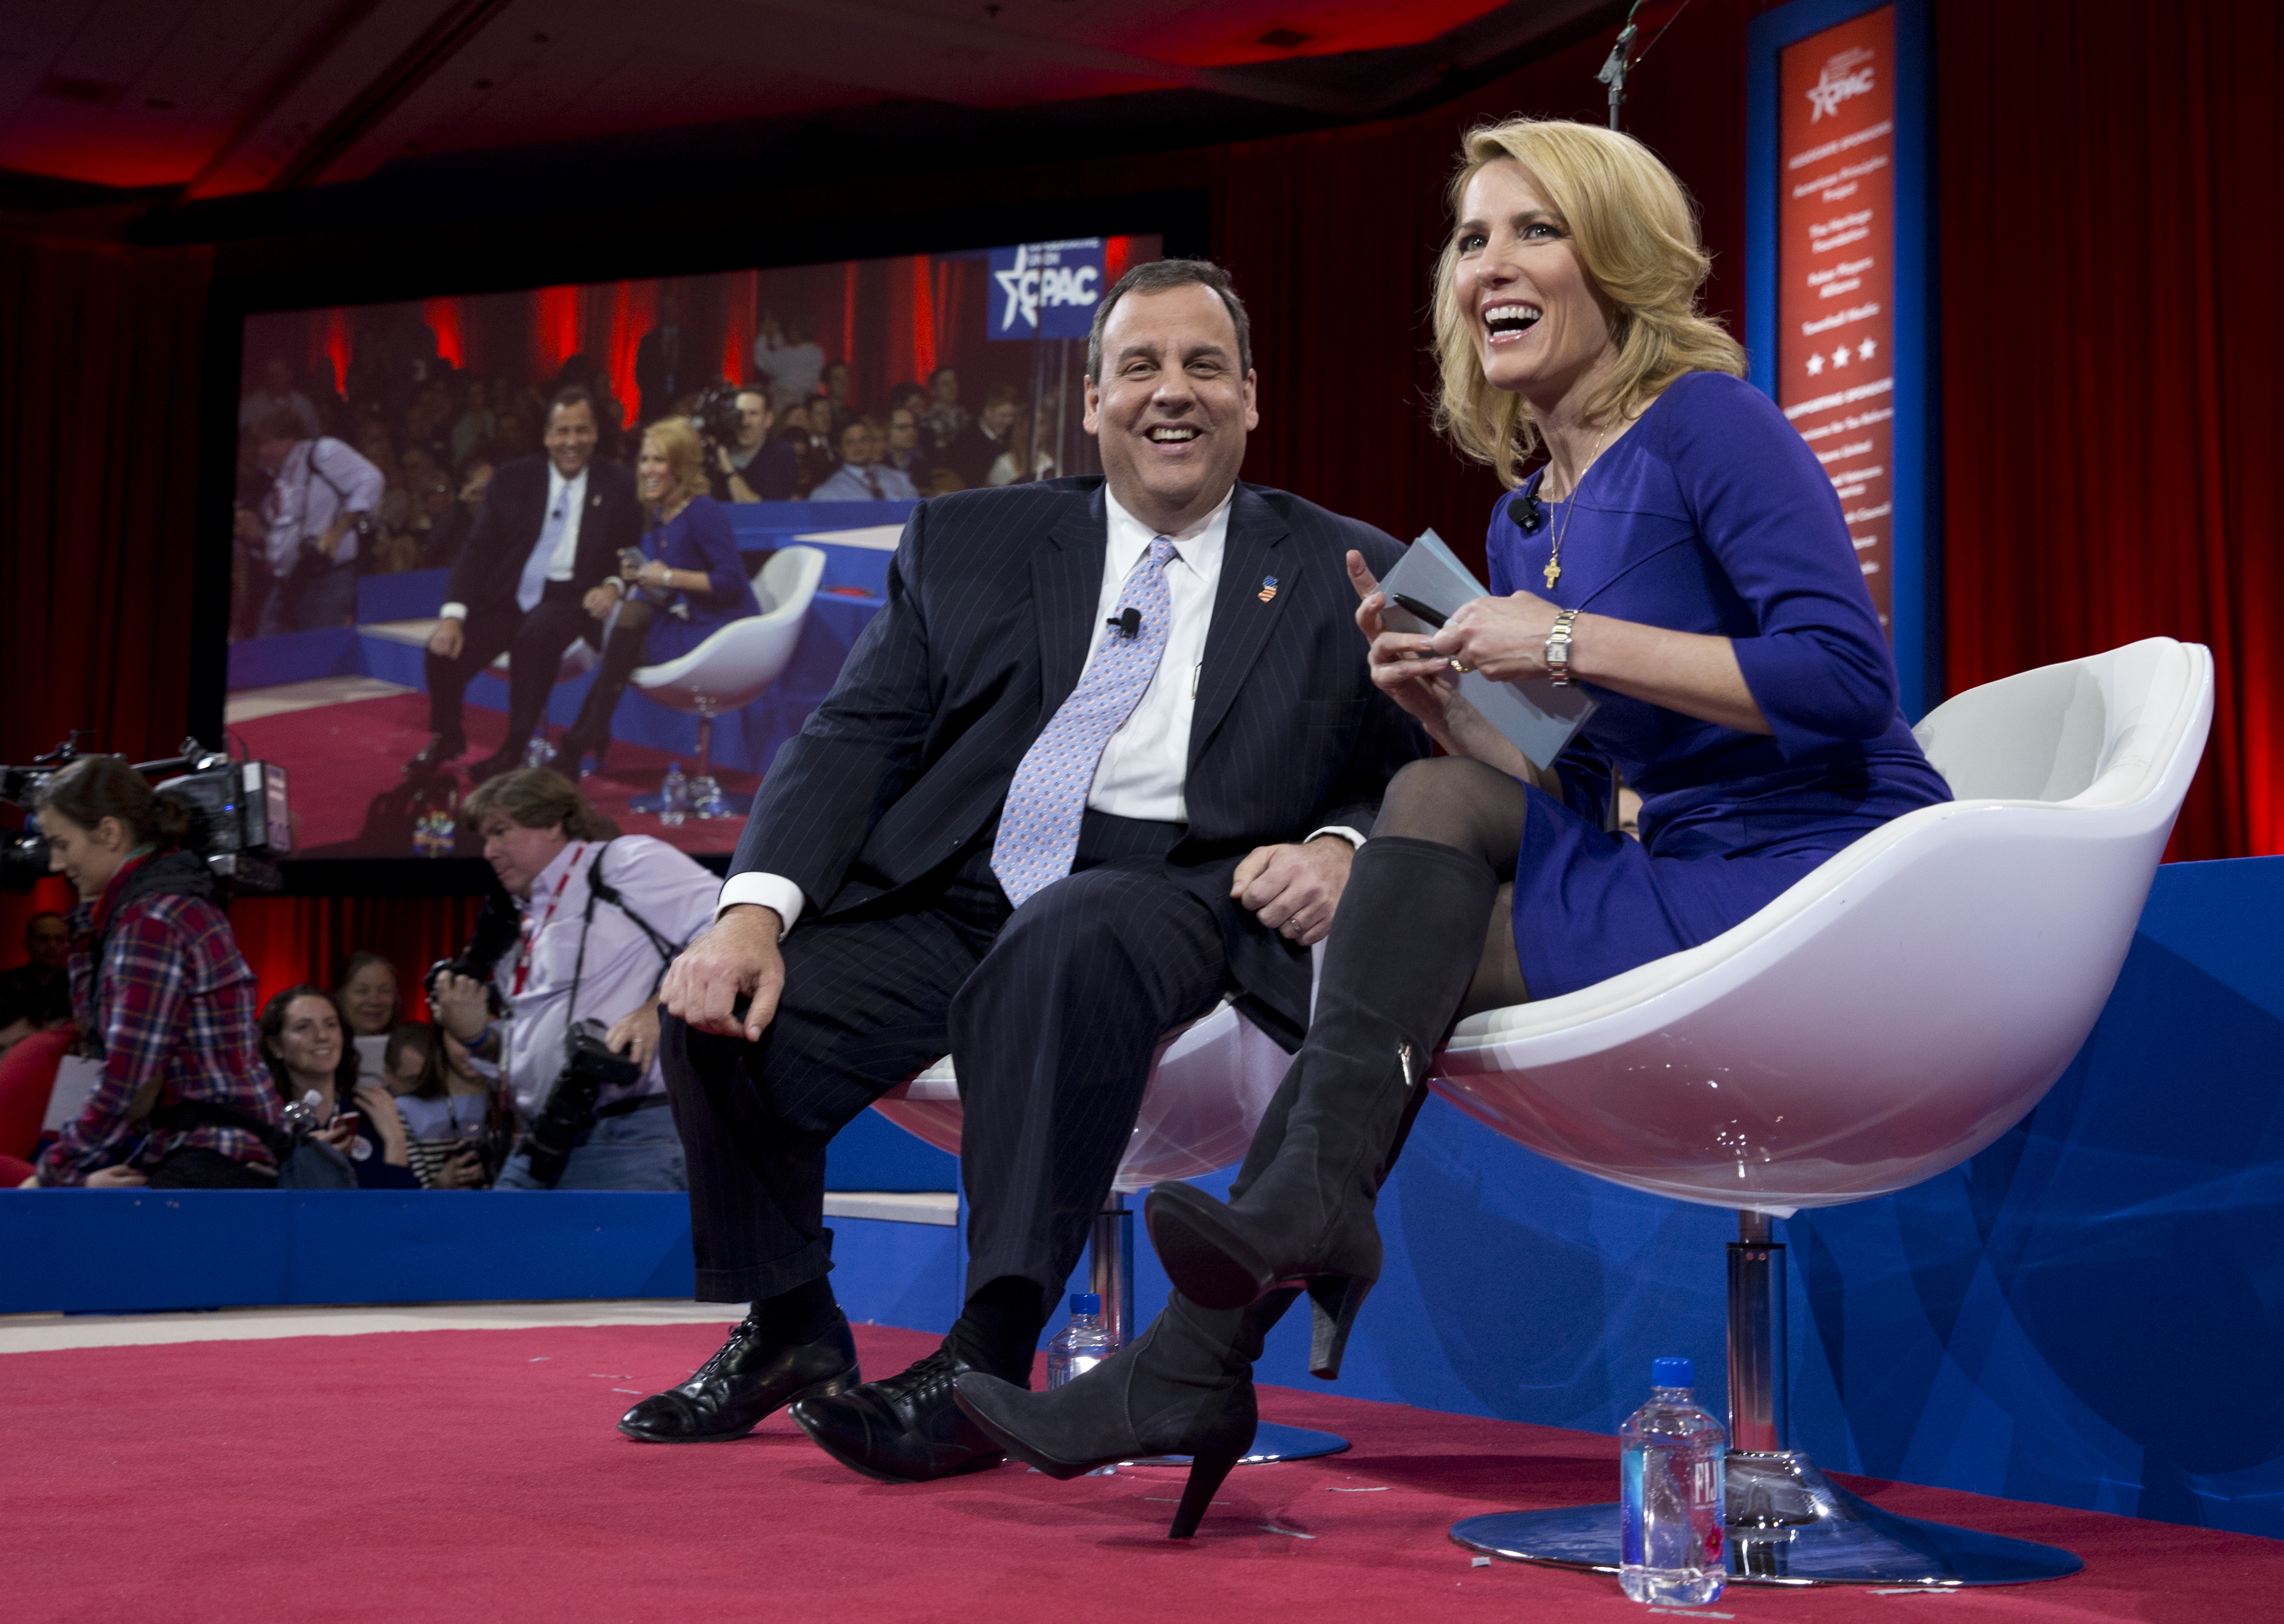 Chris Christie speaks with Laura Ingraham during the Conservative Political Action Conference in National Harbor, Md., on Feb. 26, 2015. (Carolyn Kaster&mdash;AP)